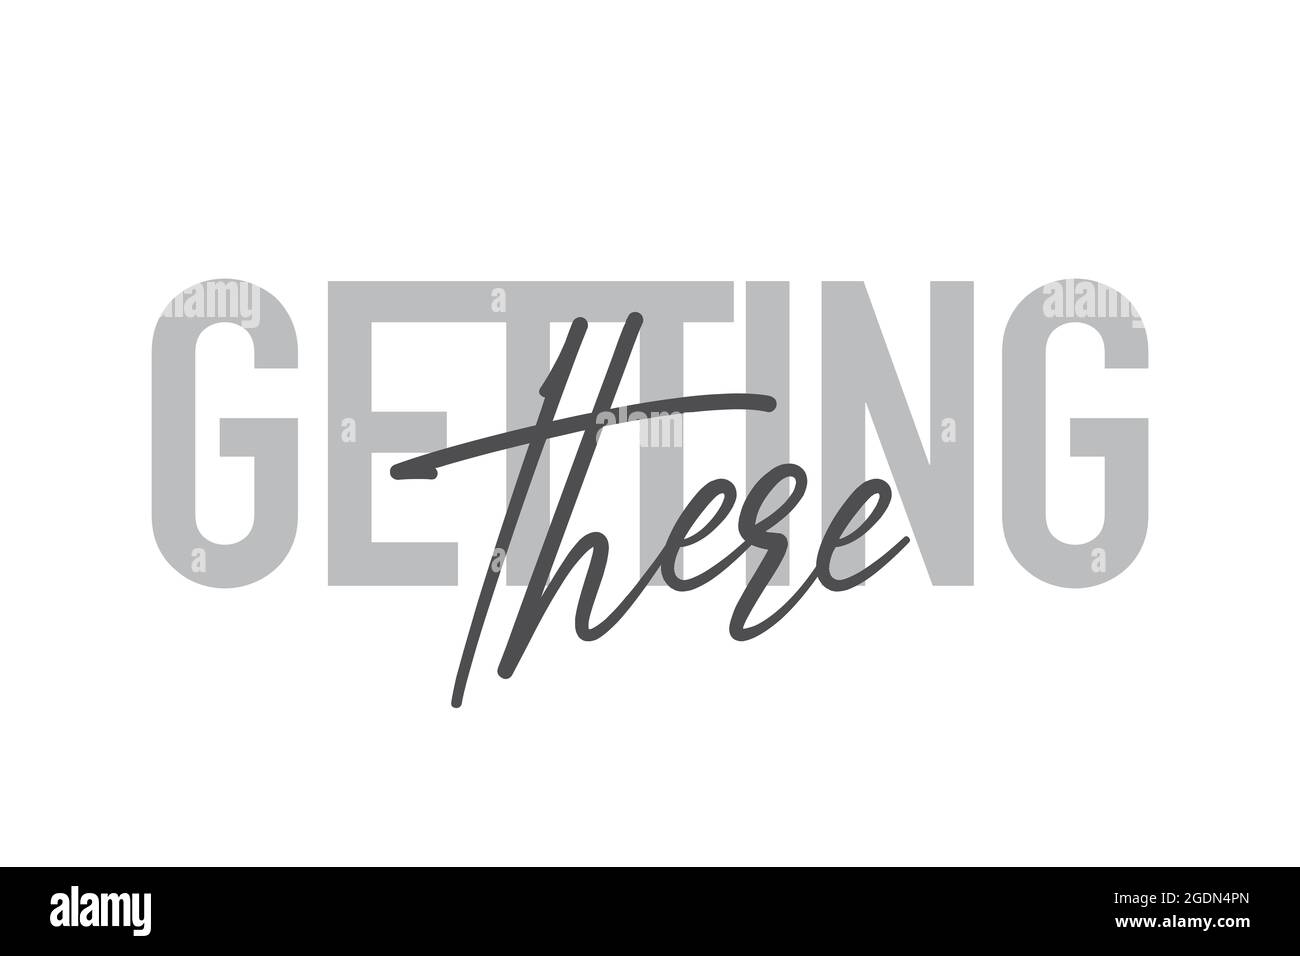 Modern, simple, minimal typographic design of a saying 'Getting There' in tones of grey color. Cool, urban, trendy and playful graphic vector art with Stock Photo